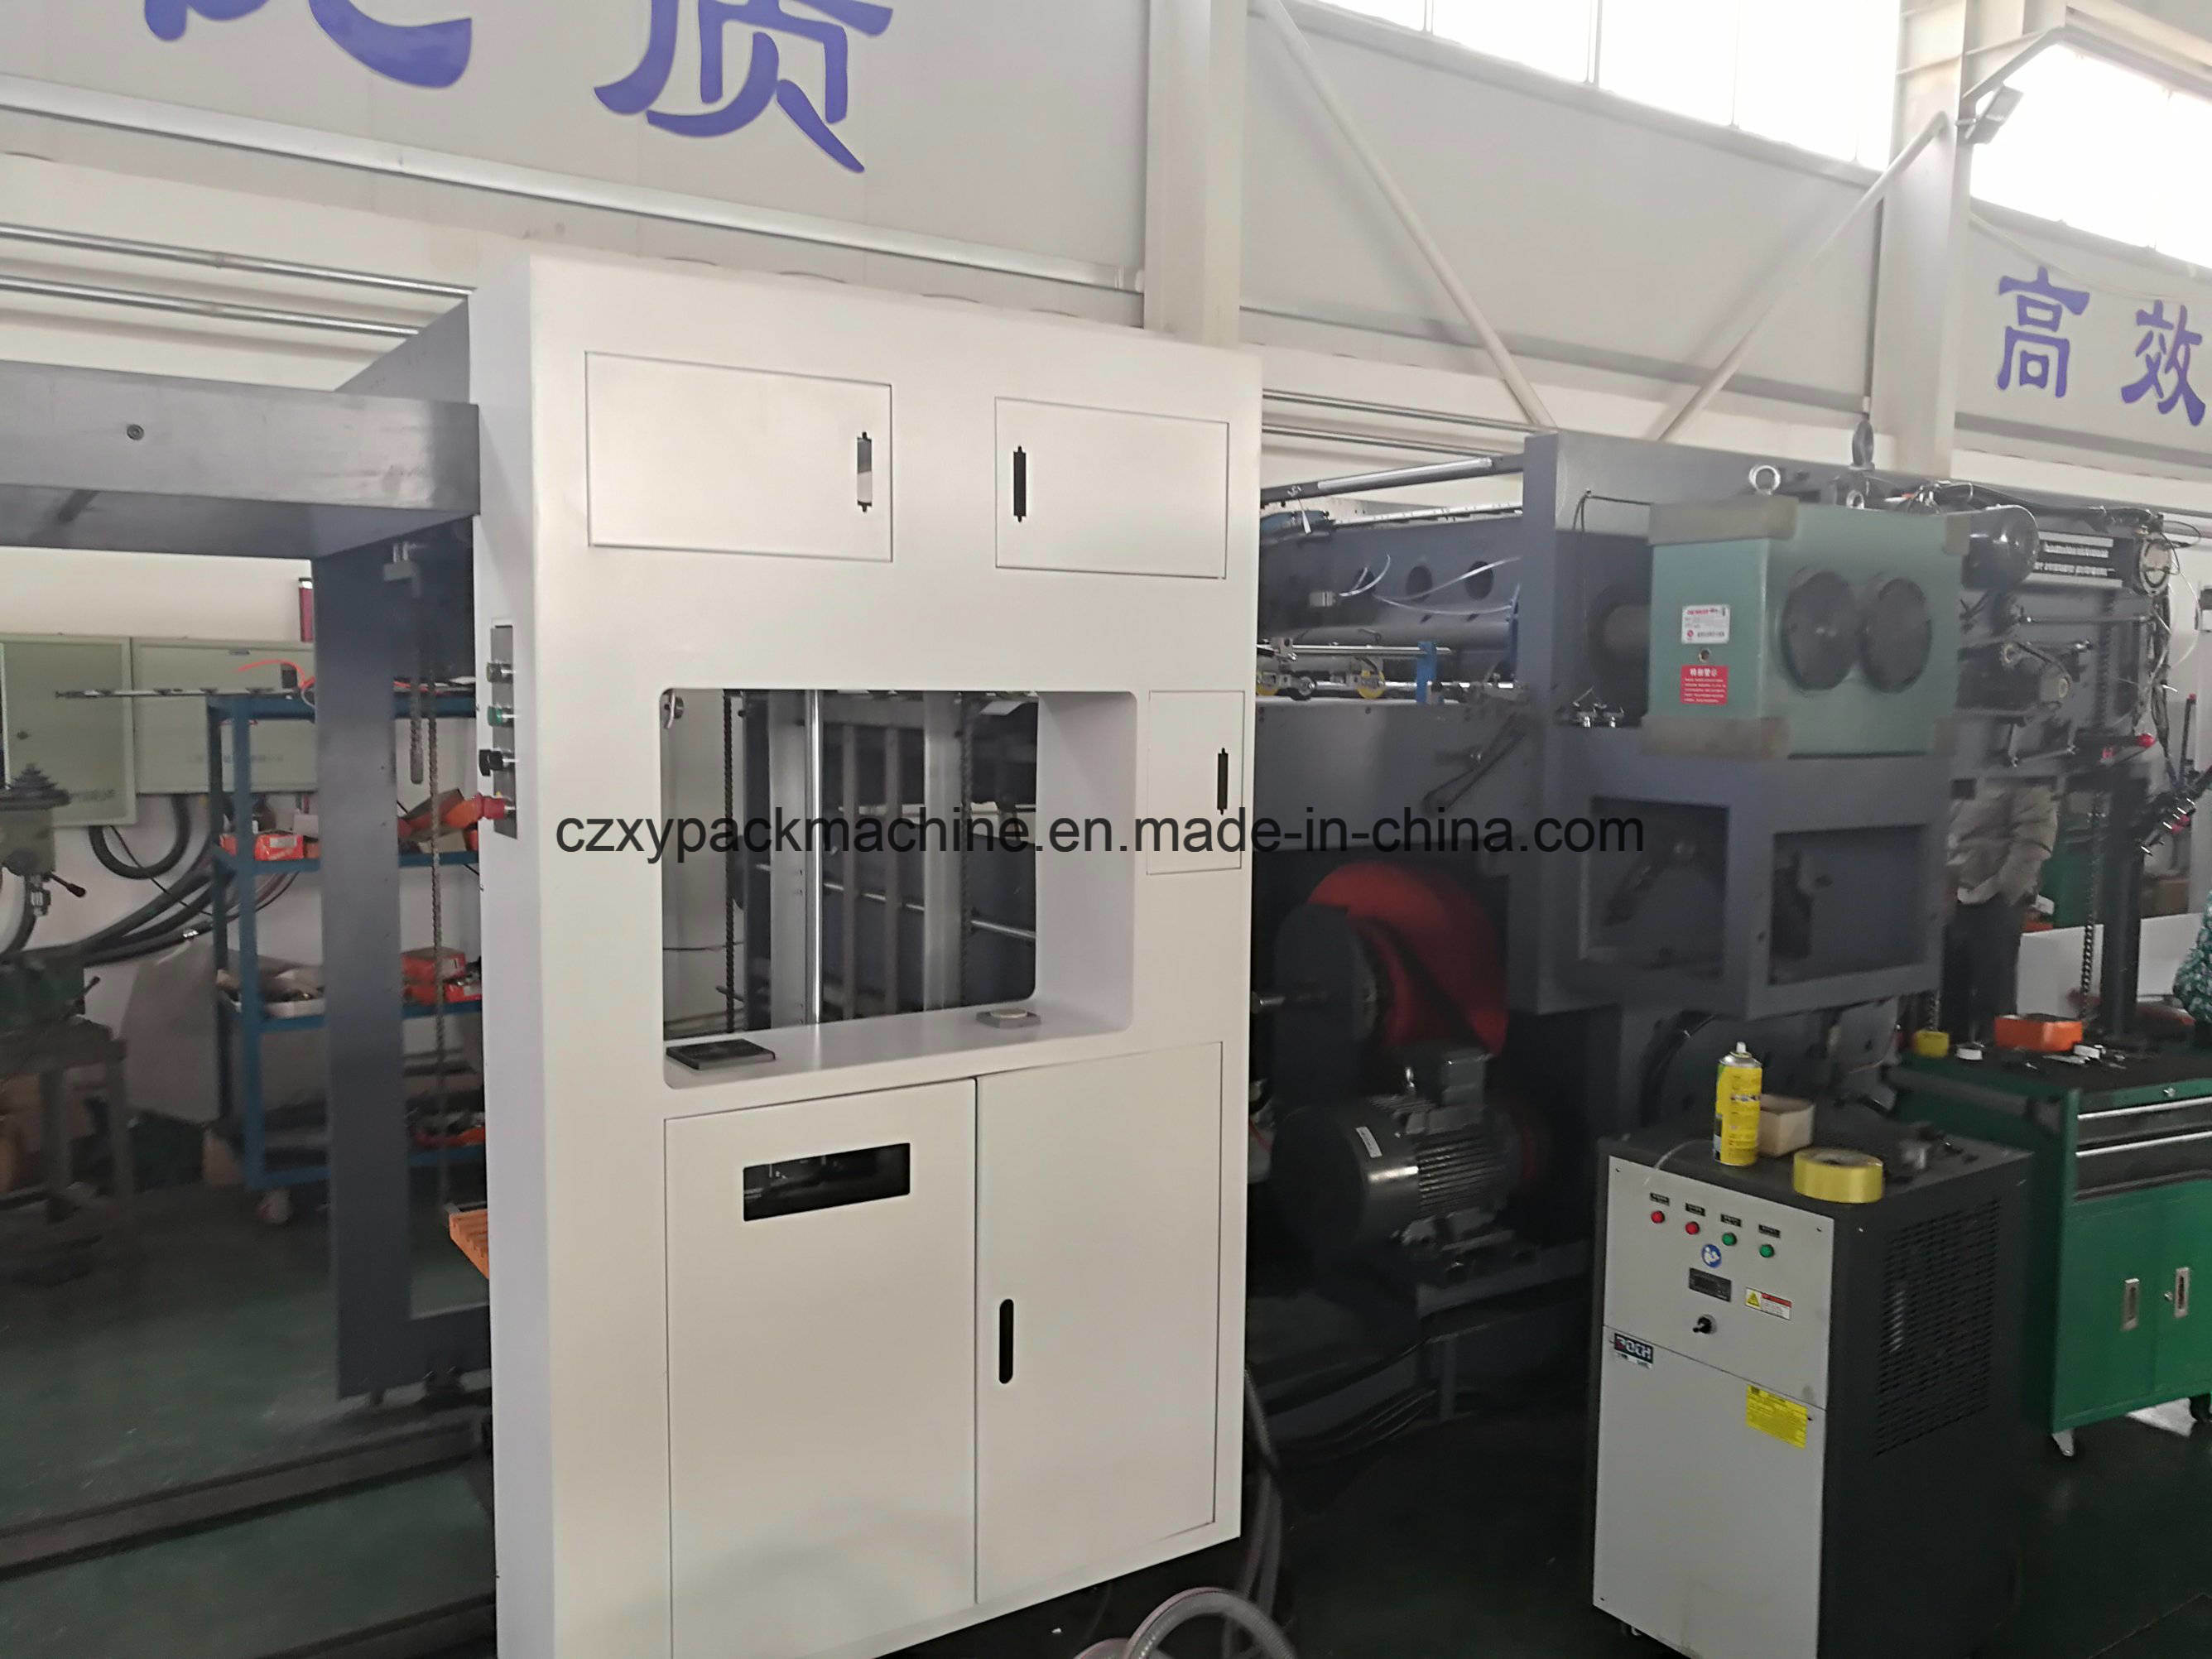 2018 New Product Automatic Flat Die Cutting Machine with Stripping